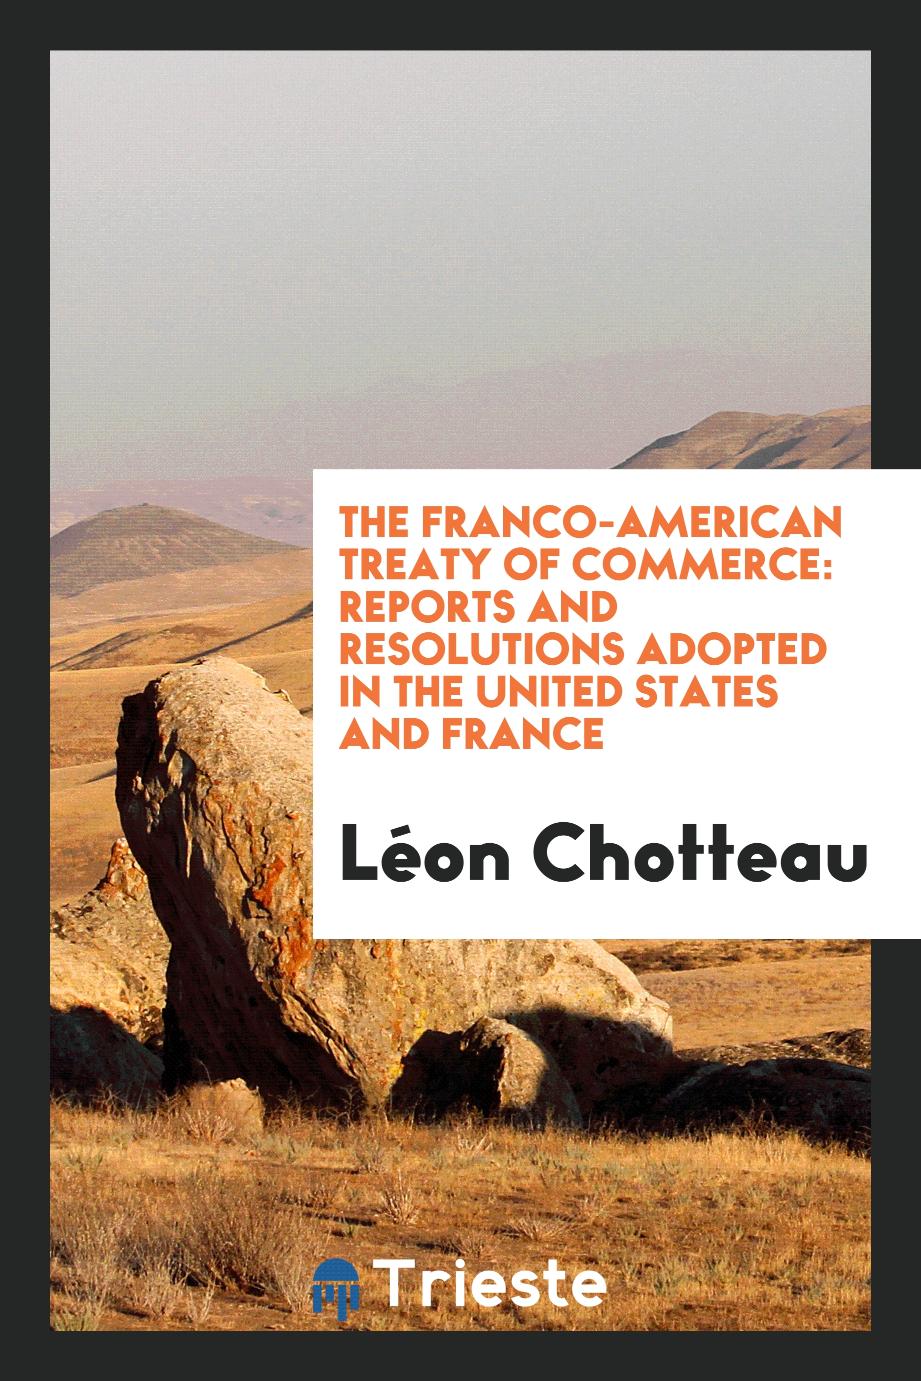 The Franco-American Treaty of Commerce: Reports and Resolutions Adopted in the United States and France